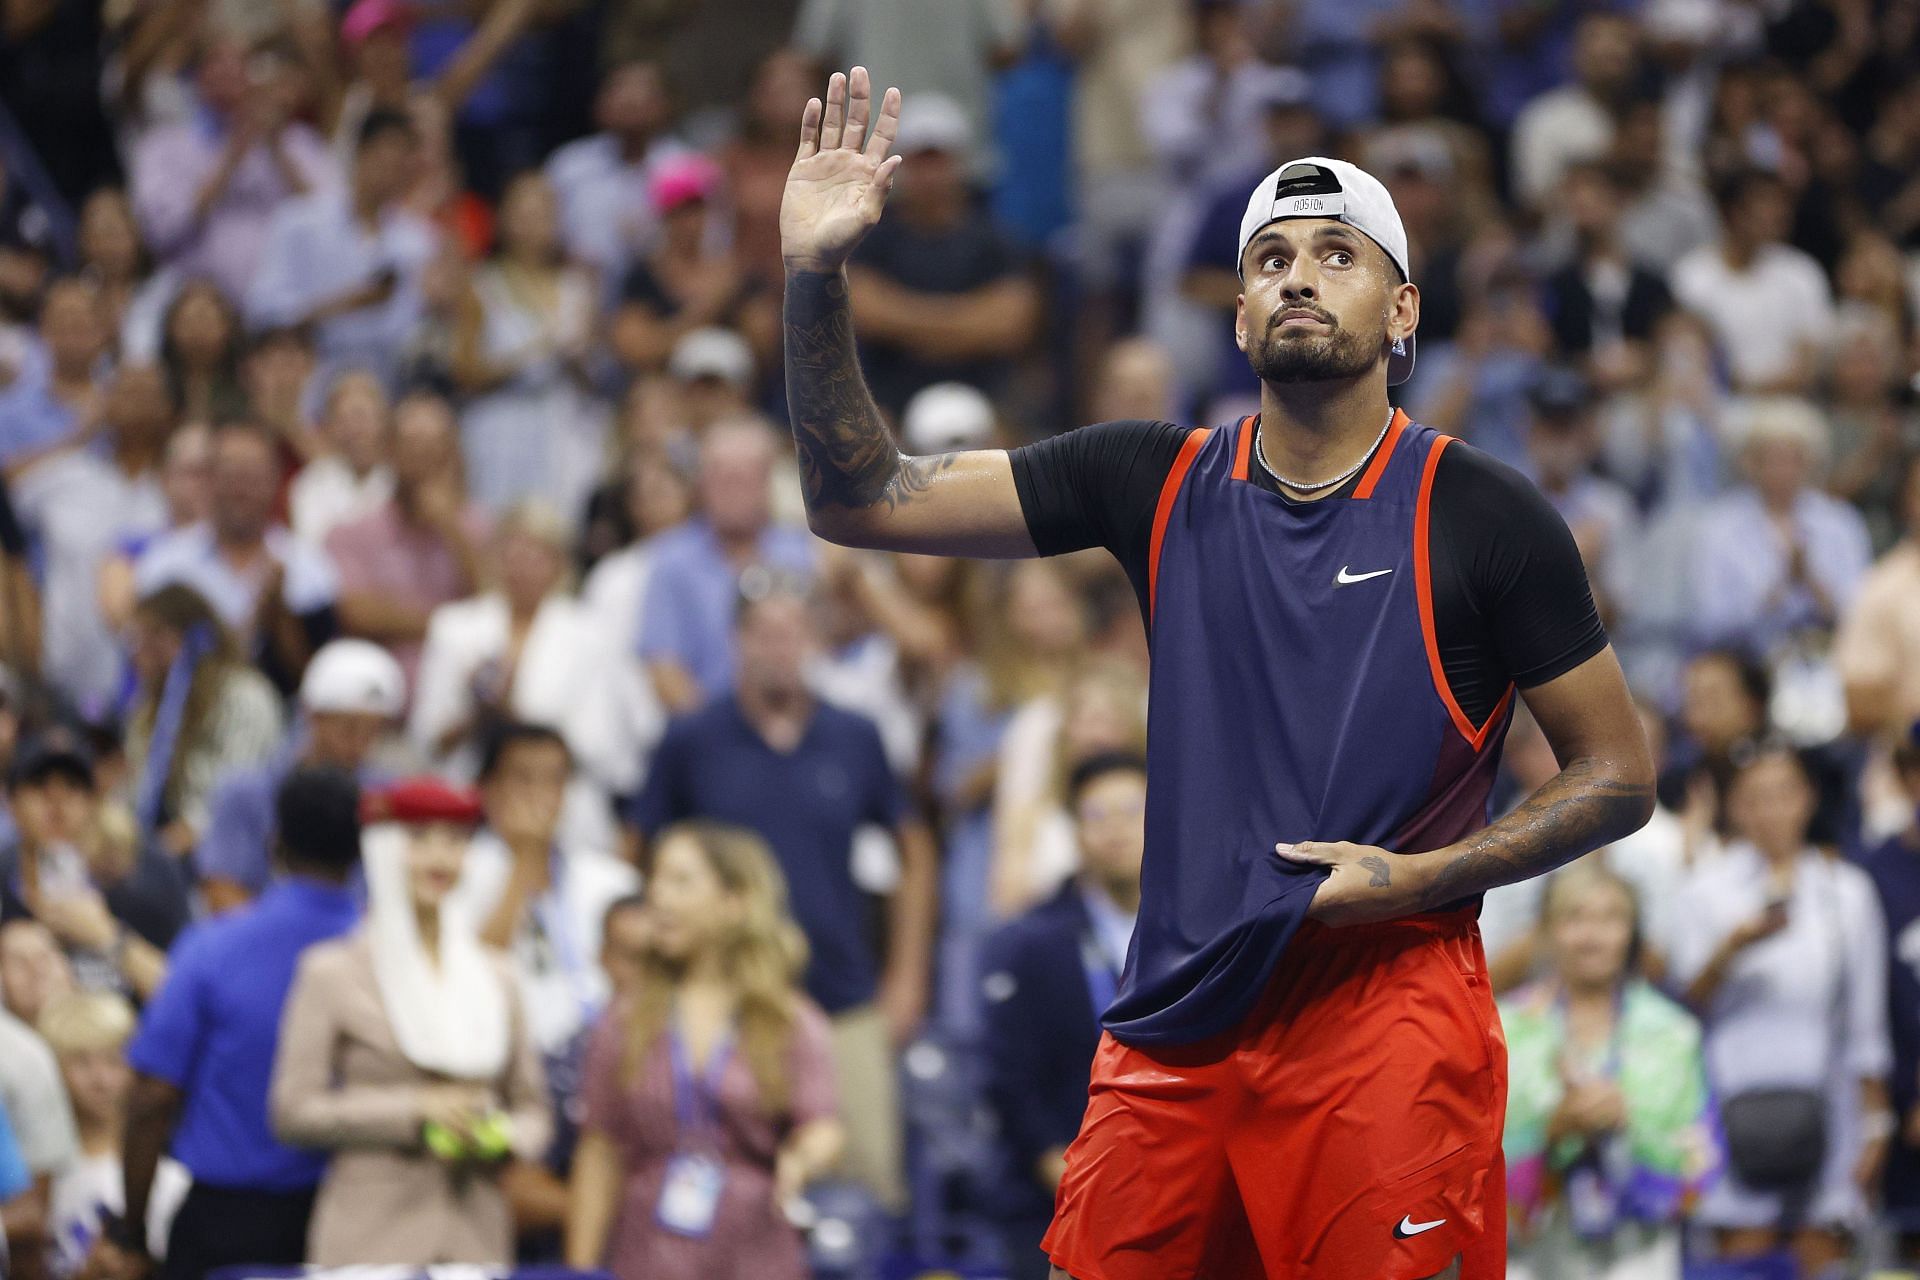 Nick Kyrgios celebrates his win against Daniil Medvedev at the 2022 US Open - Day 7